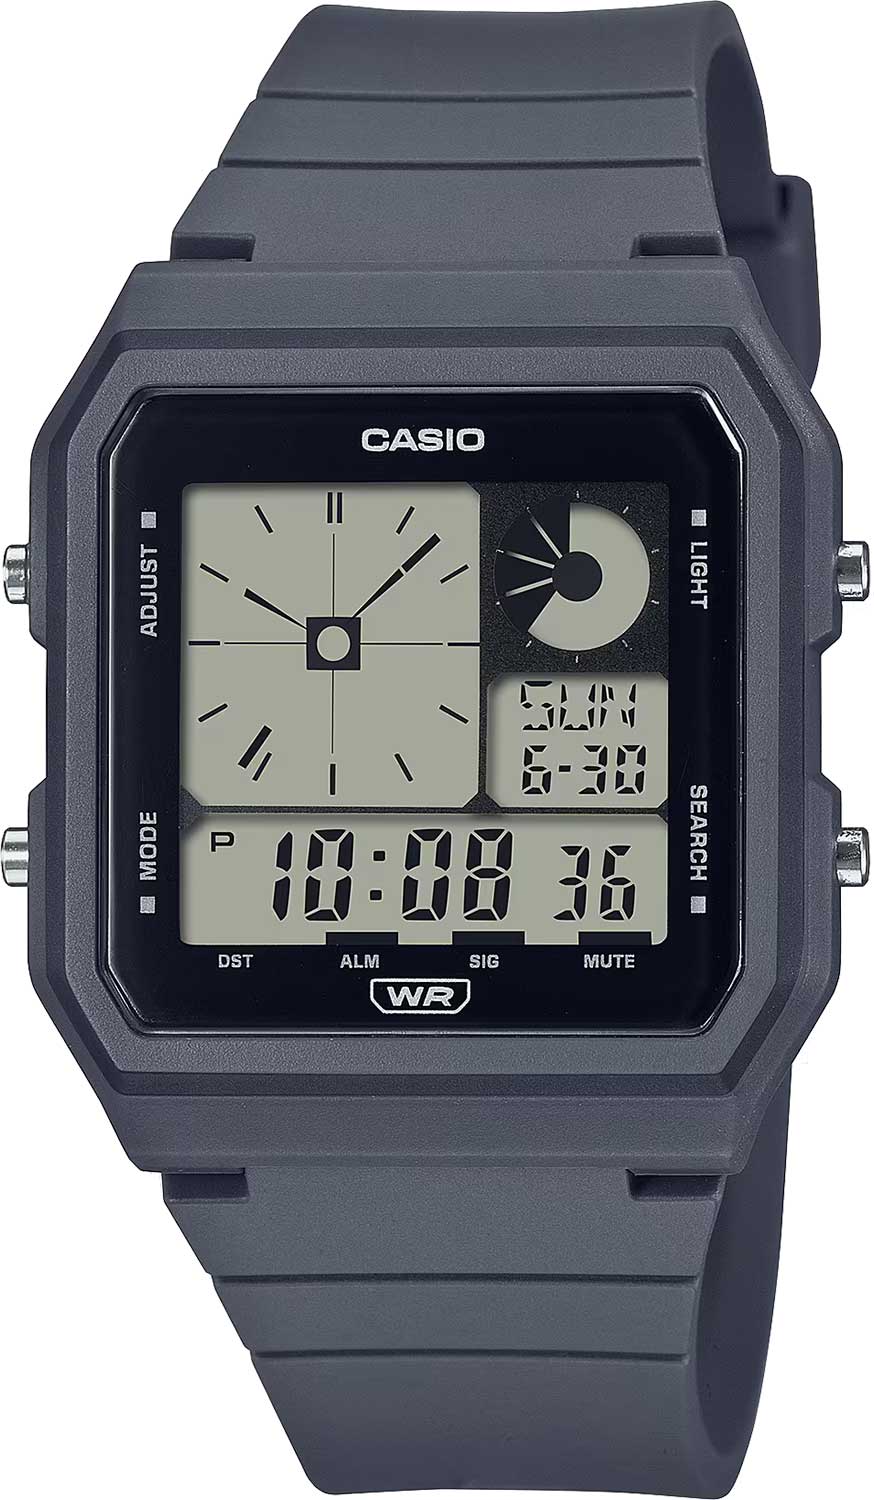    Casio Collection LF-20W-8A2  